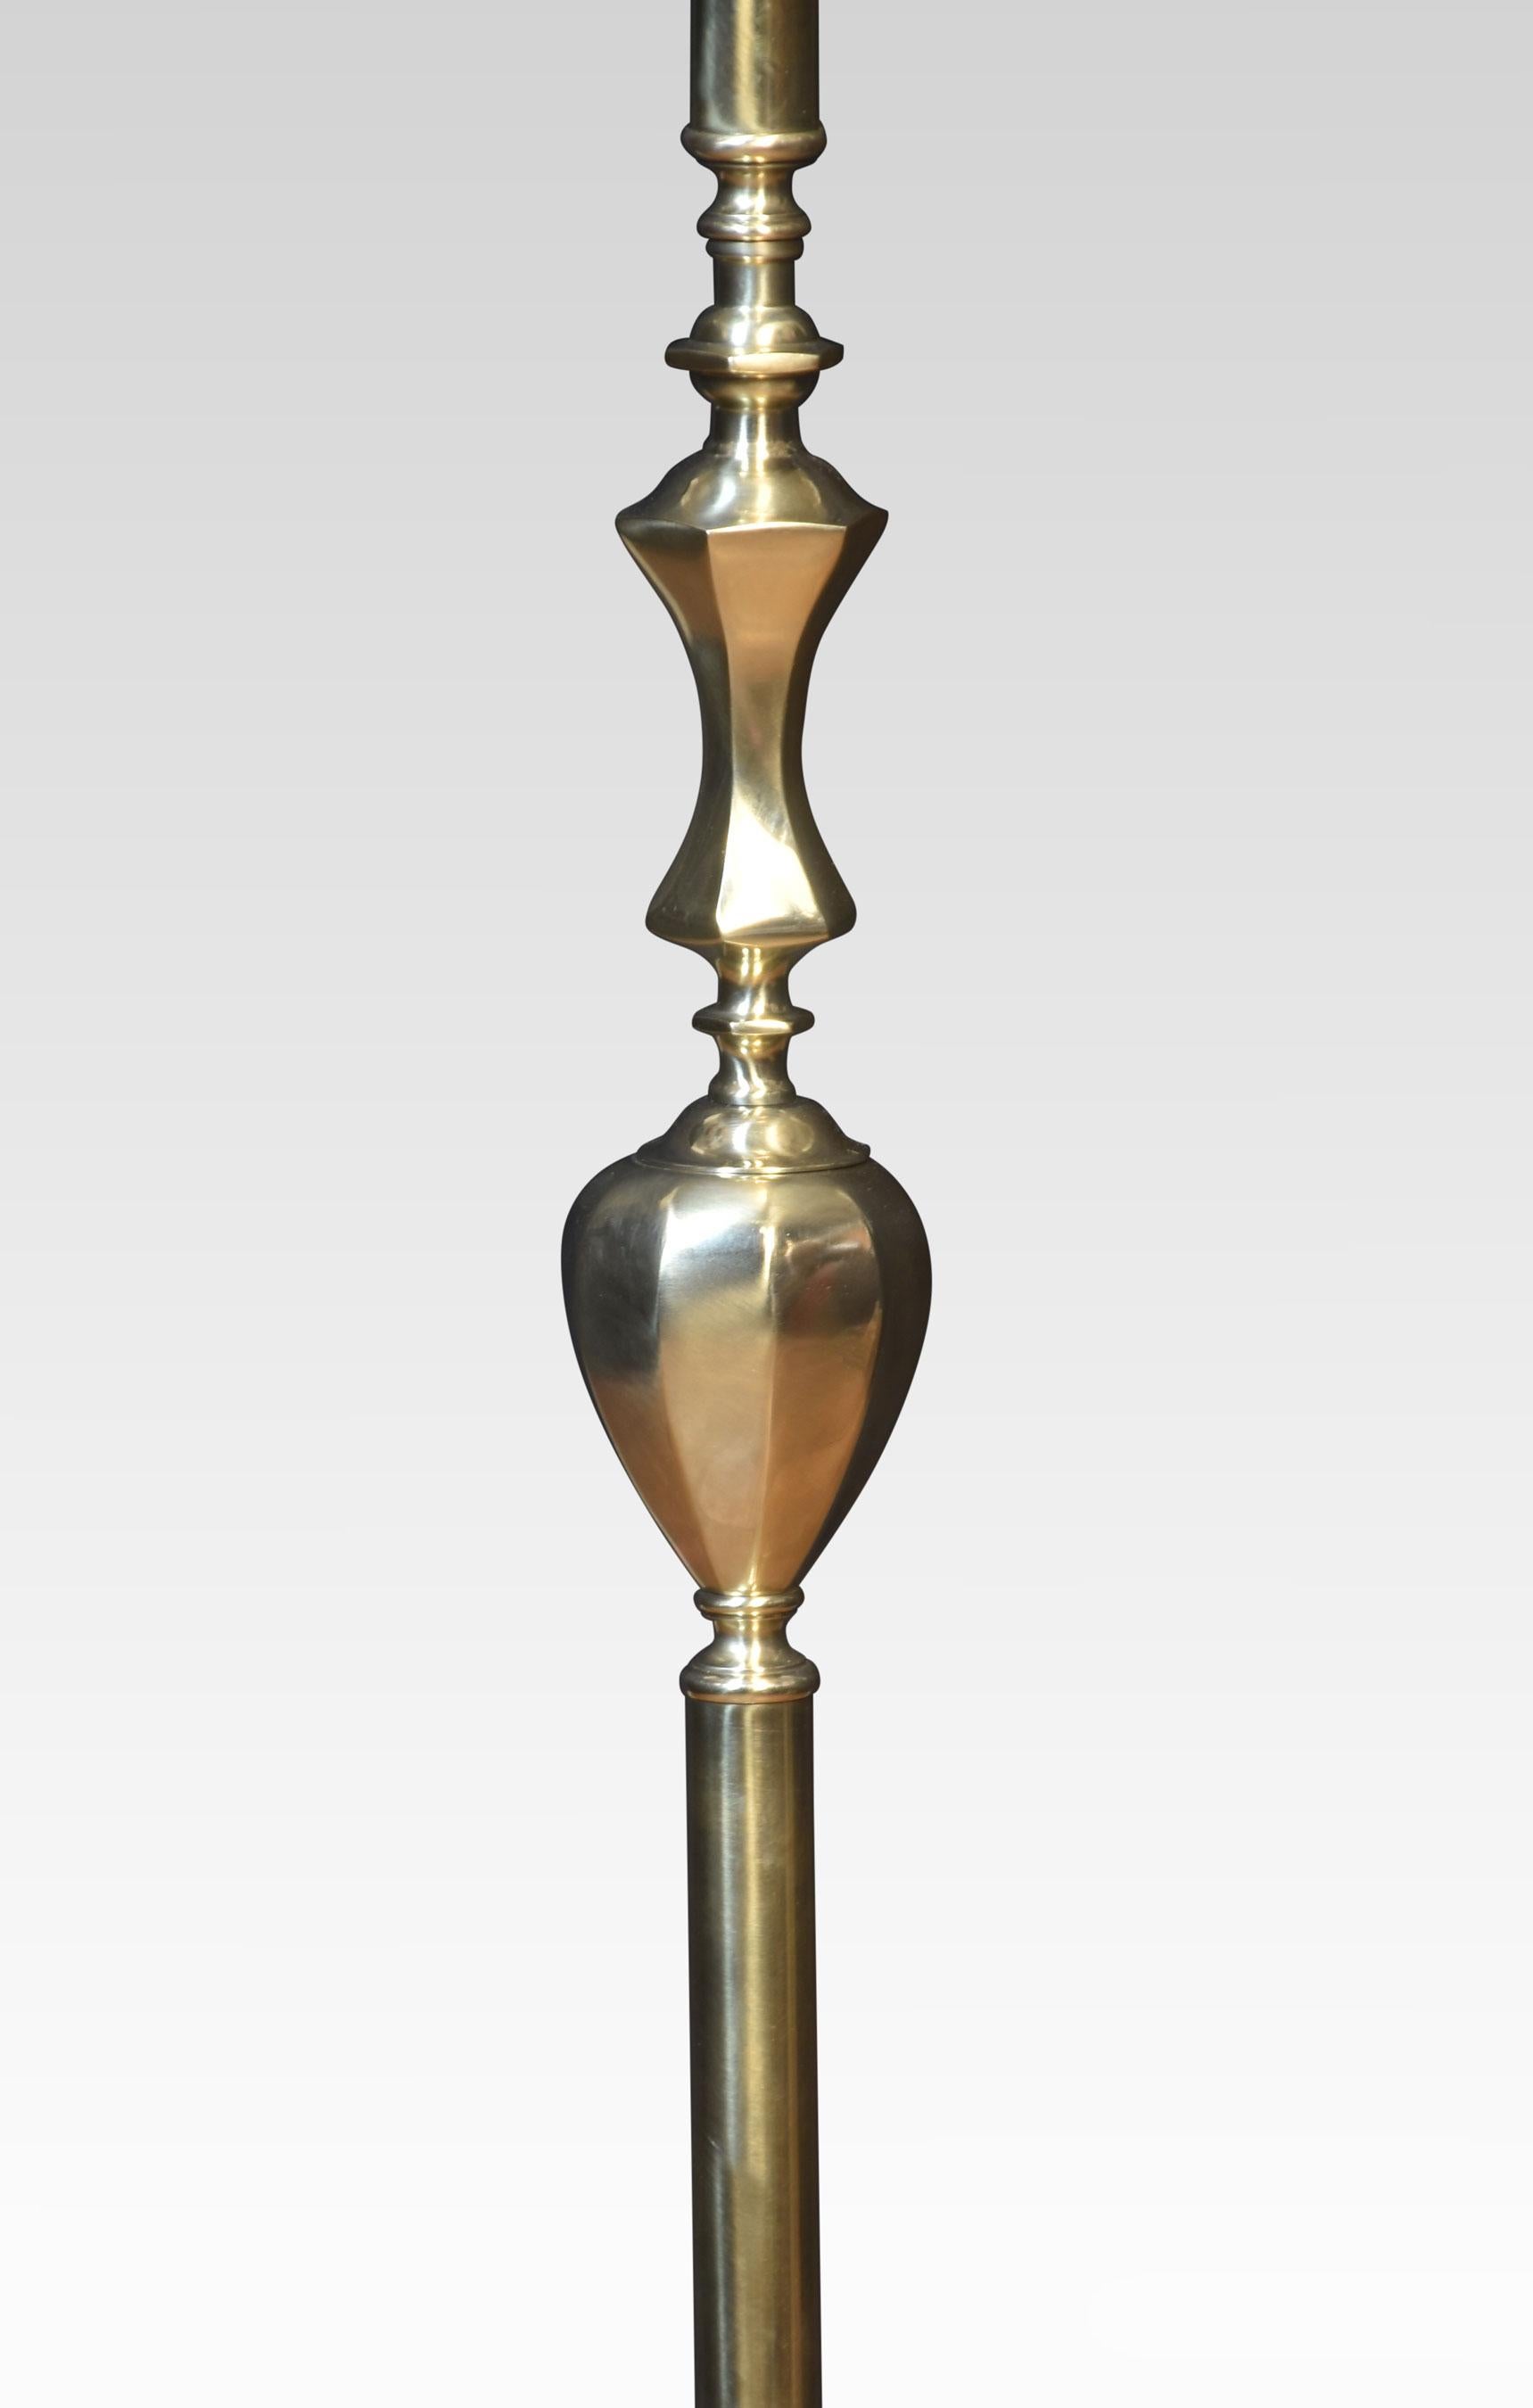 Brass standard lamp, the well-cast stem raised up on a stepped base.
Dimensions
Height 57.5 Inches
Width 10 Inches
Depth 10 Inches